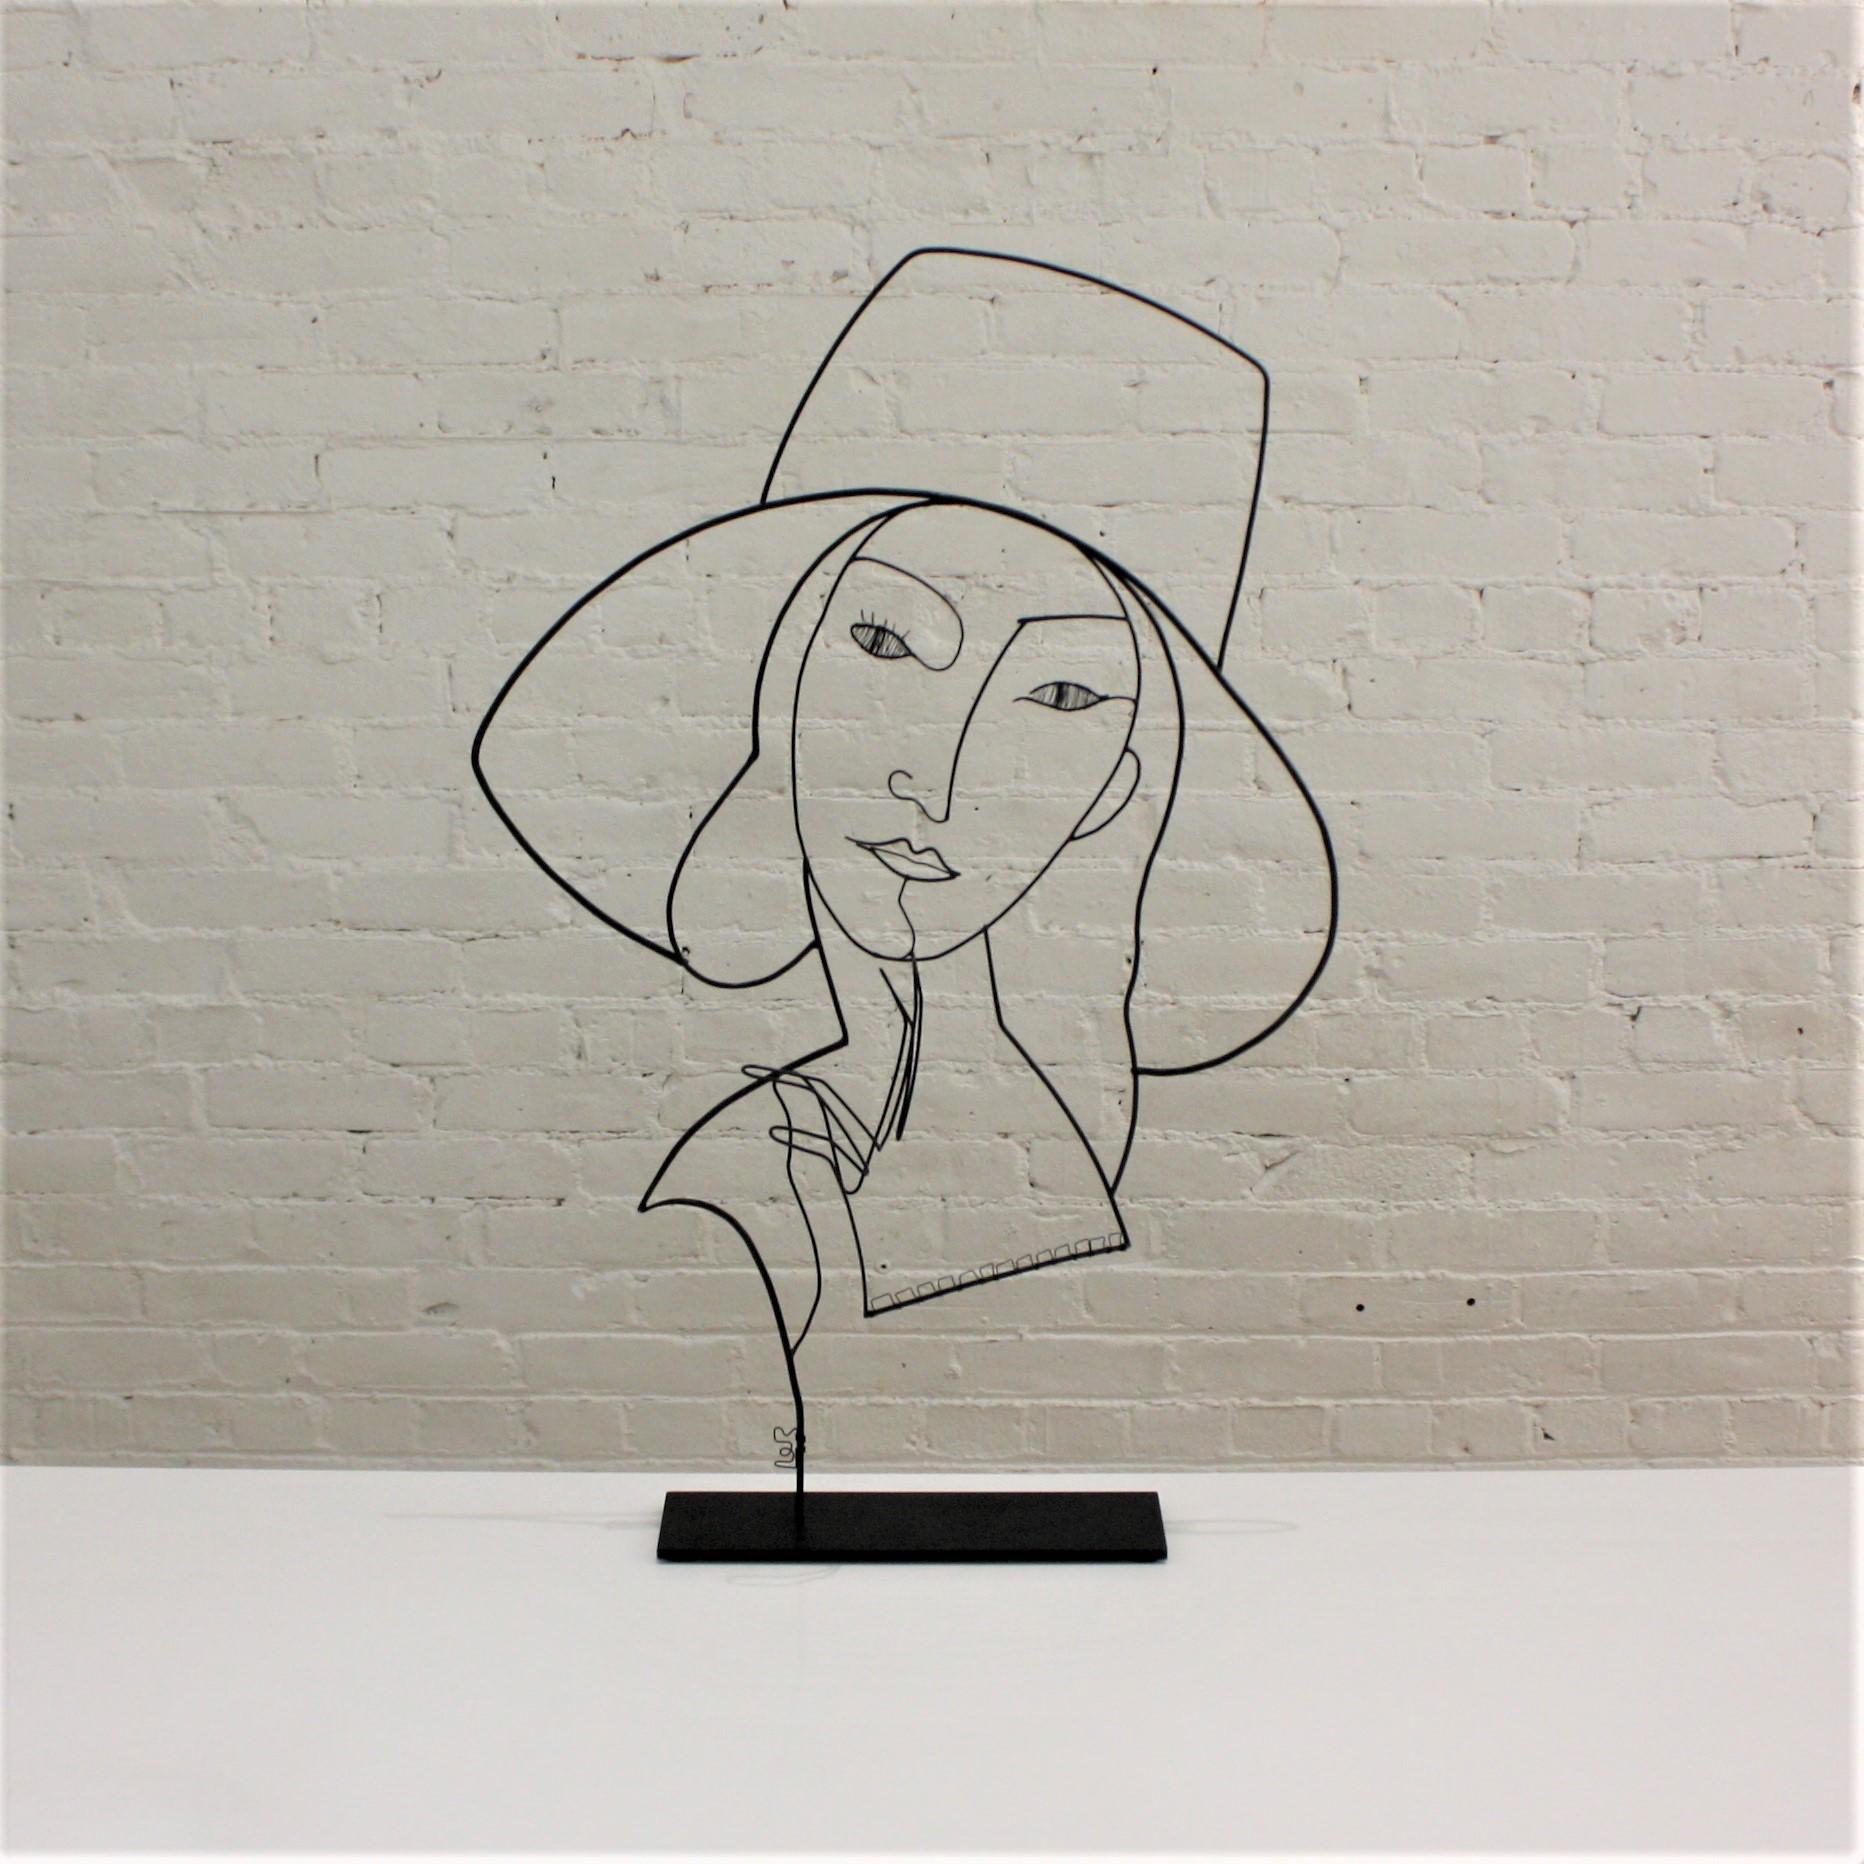 Hammered iron wire sculpture with steel stand. Laure Simoneau's creation 'The Woman in a Hat' is part of her Modigliani Series. Her sculptures follow in the footsteps of Alexander Calder, creating substance out of nothing : the space between the